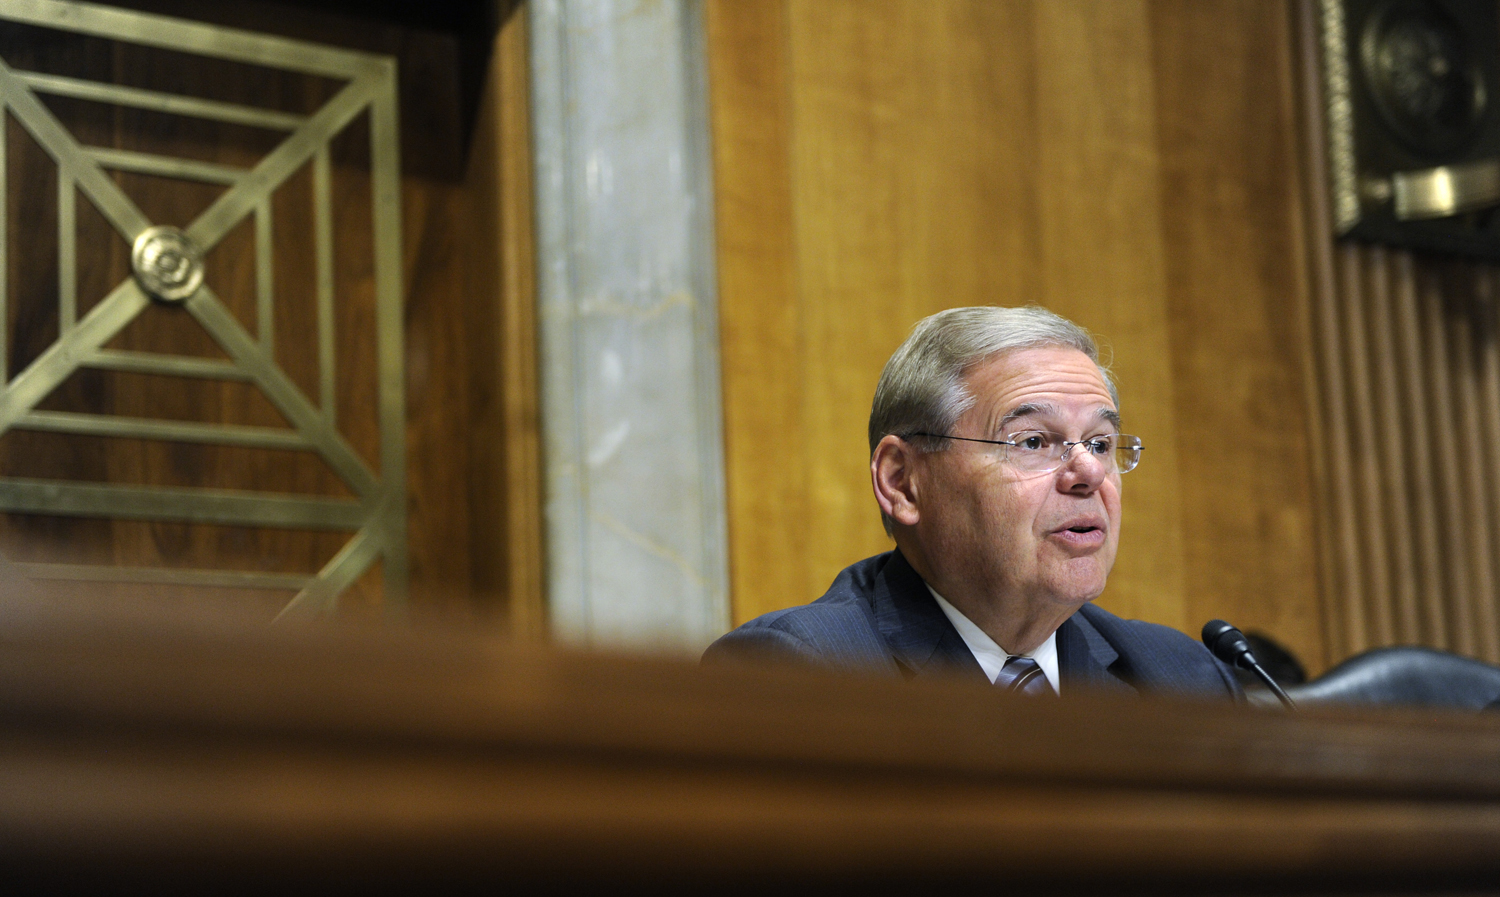 Senate Foreign Relations Committee Chairman Sen. Robert Menendez, D-N.J., questions State Department Undersecretary for Political Affairs Wendy Sherman on Capitol Hill in Washington on July 29, 2014. (Susan Walsh — AP)